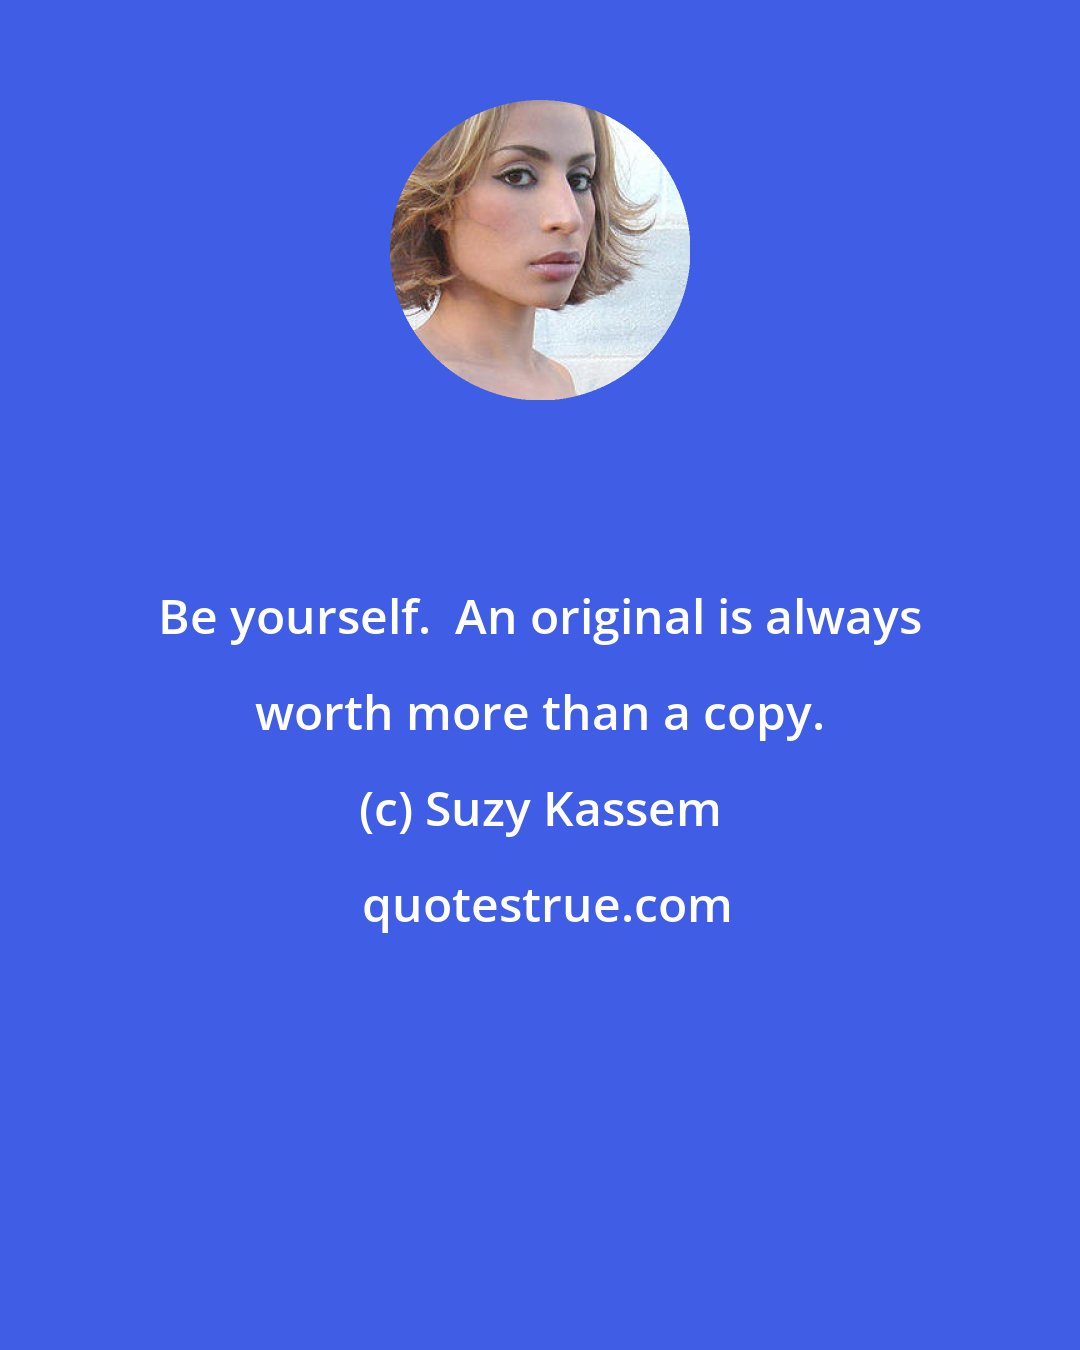 Suzy Kassem: Be yourself.  An original is always worth more than a copy.